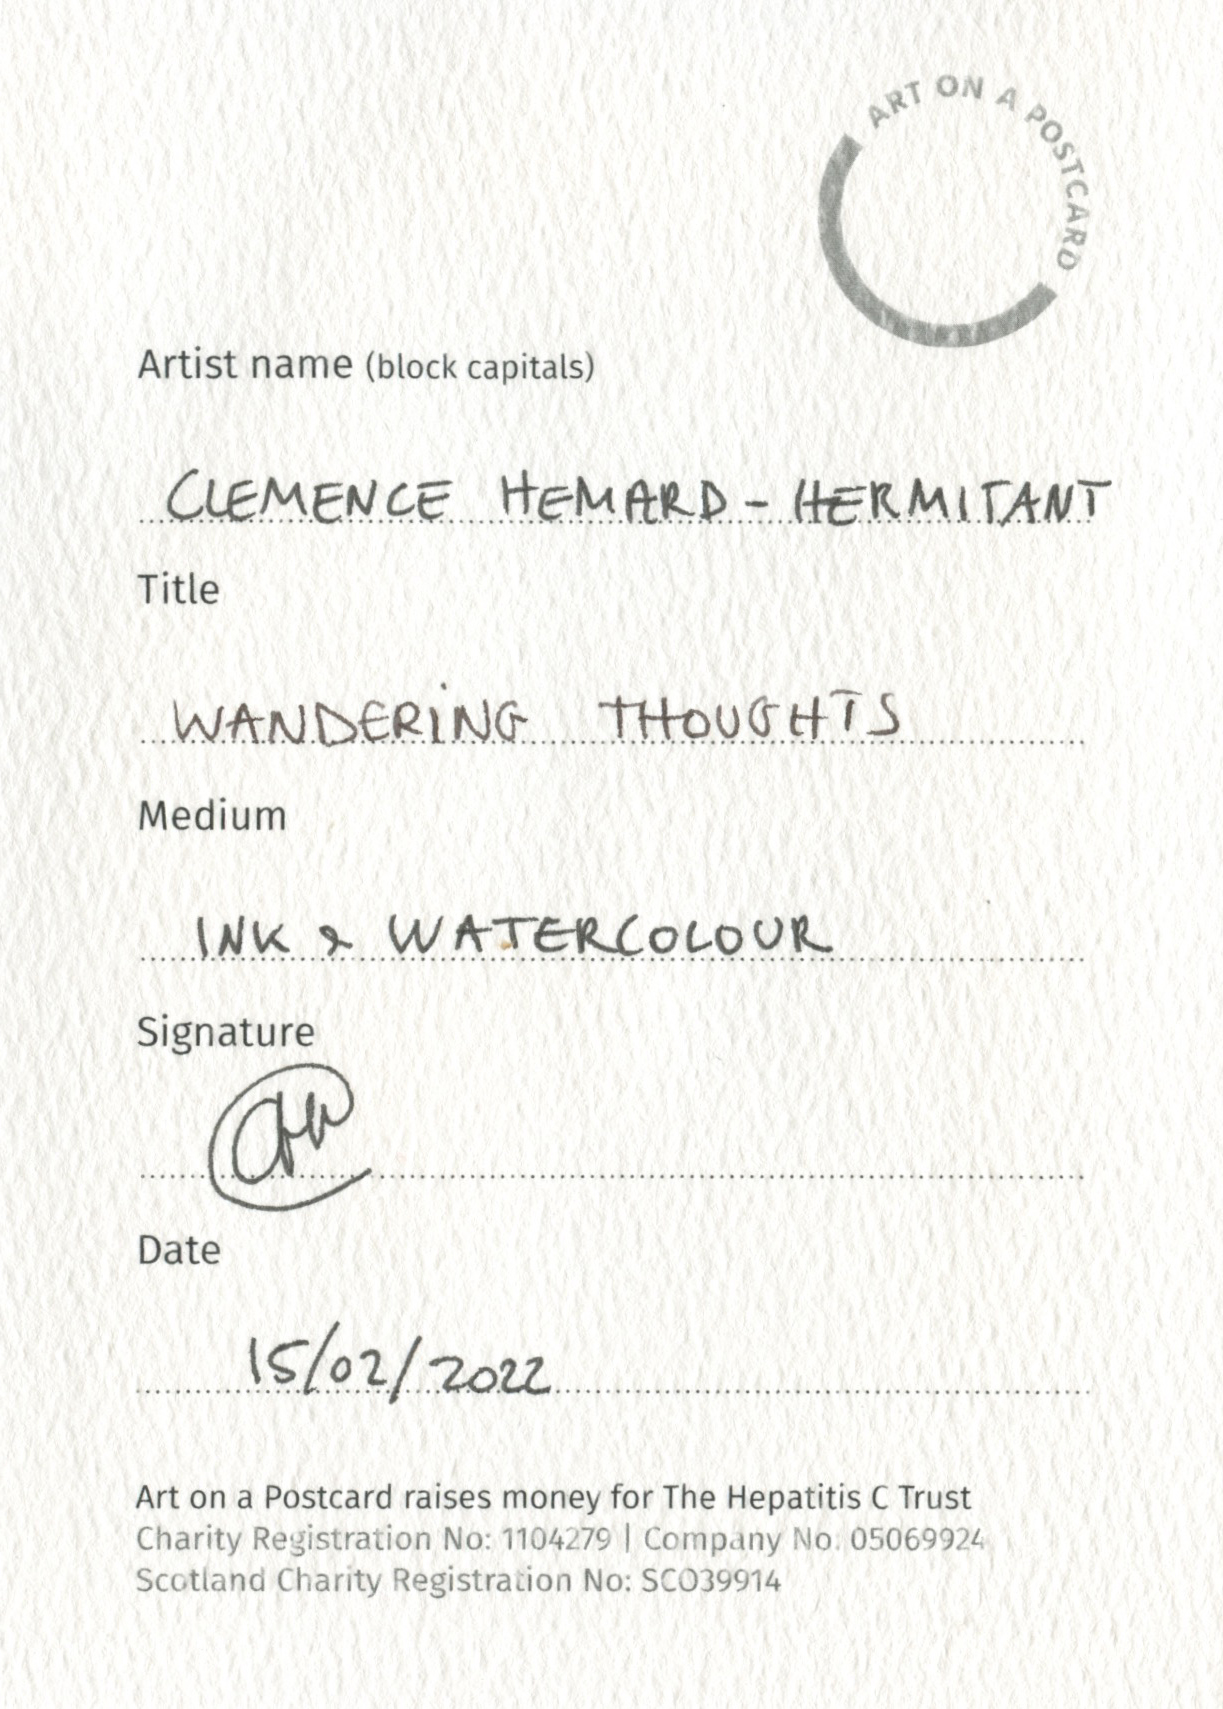 49. Clemence Hemard-Hermitant - Wandering Thoughts - BACK